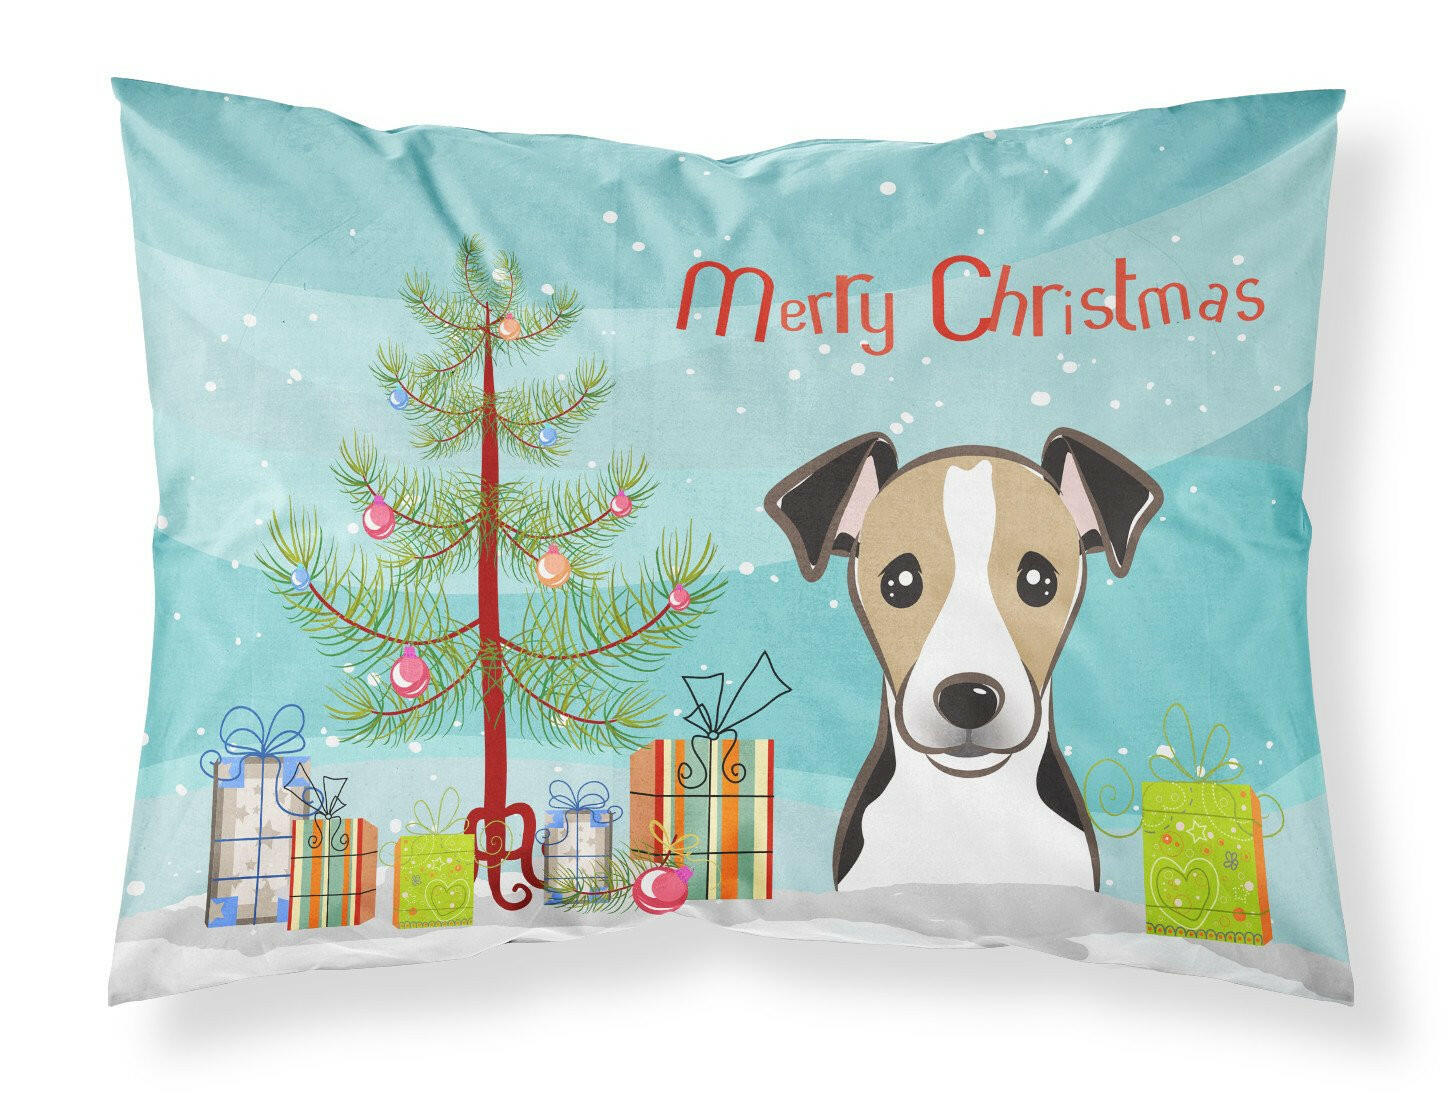 Christmas Tree and Jack Russell Terrier Fabric Standard Pillowcase BB1633PILLOWCASE by Caroline's Treasures